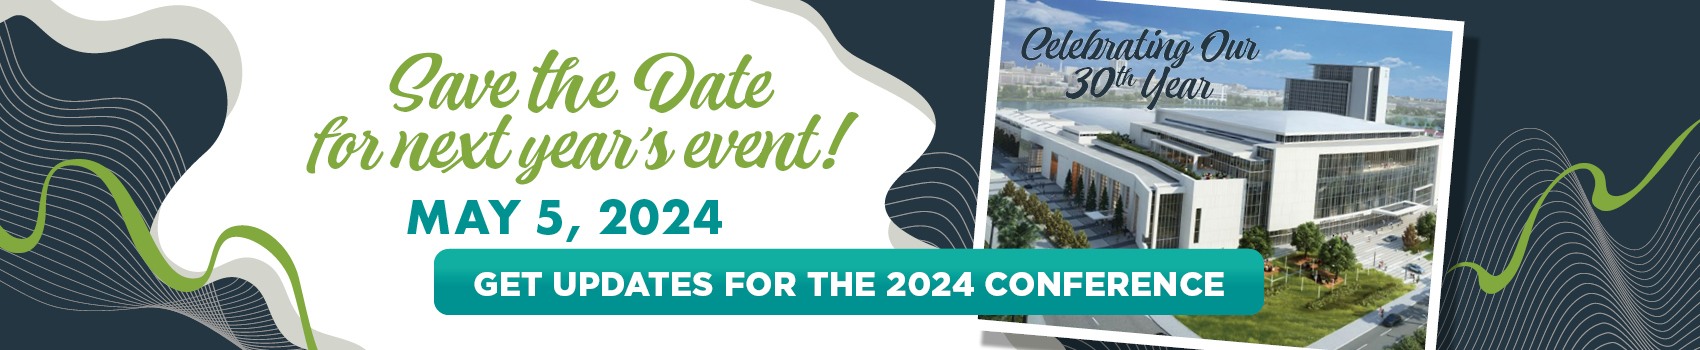 Save the Date
for next year’s event!
May 5, 2024
